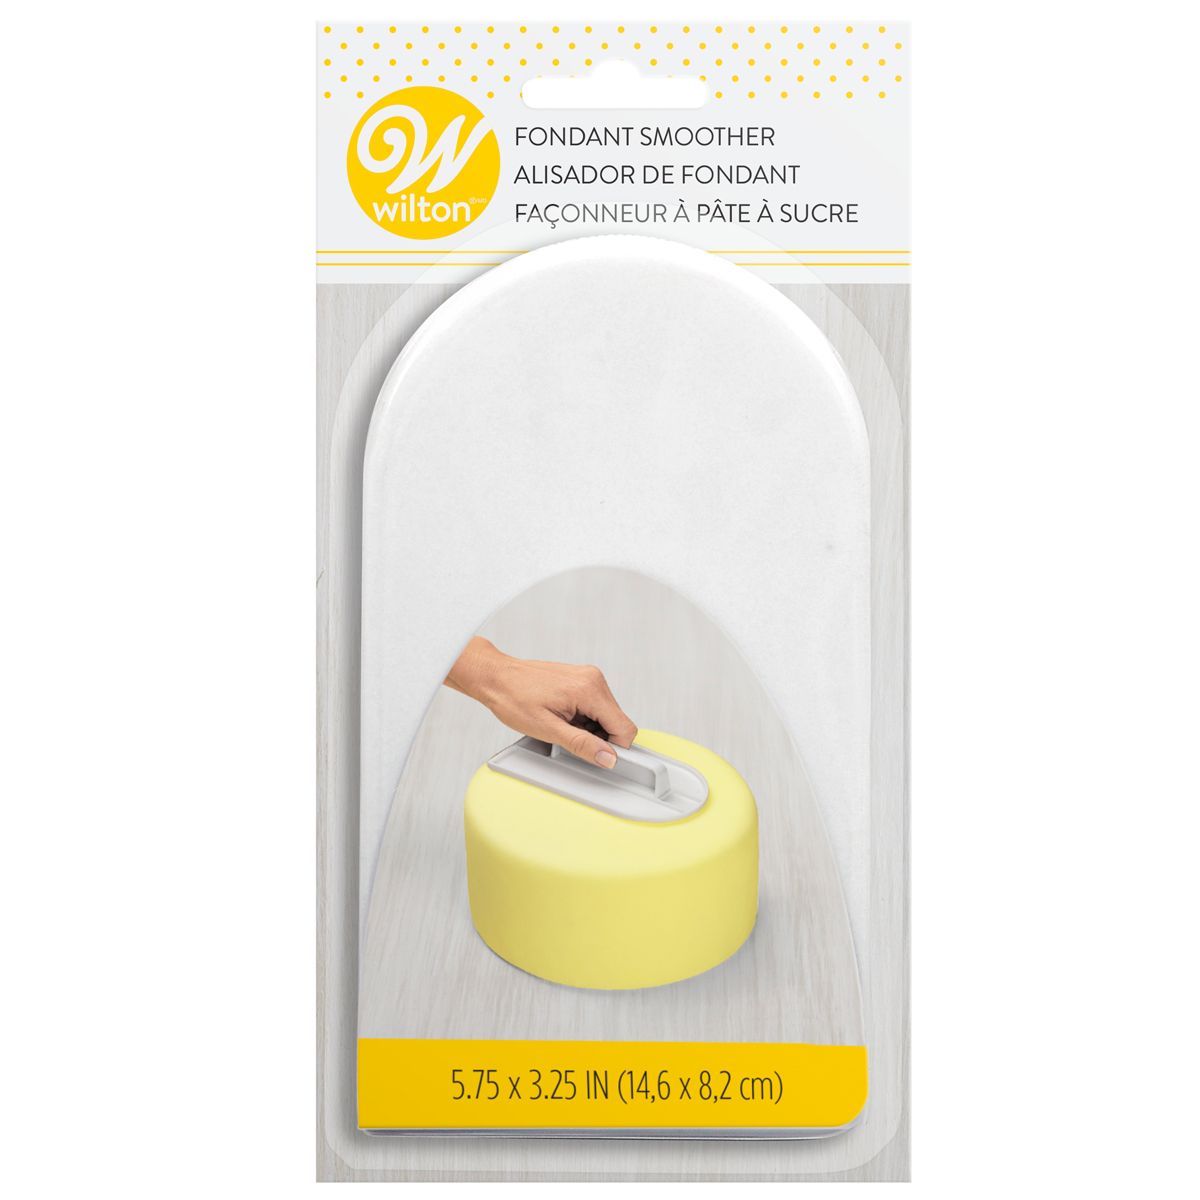 Easy Glide Fondant Smoother